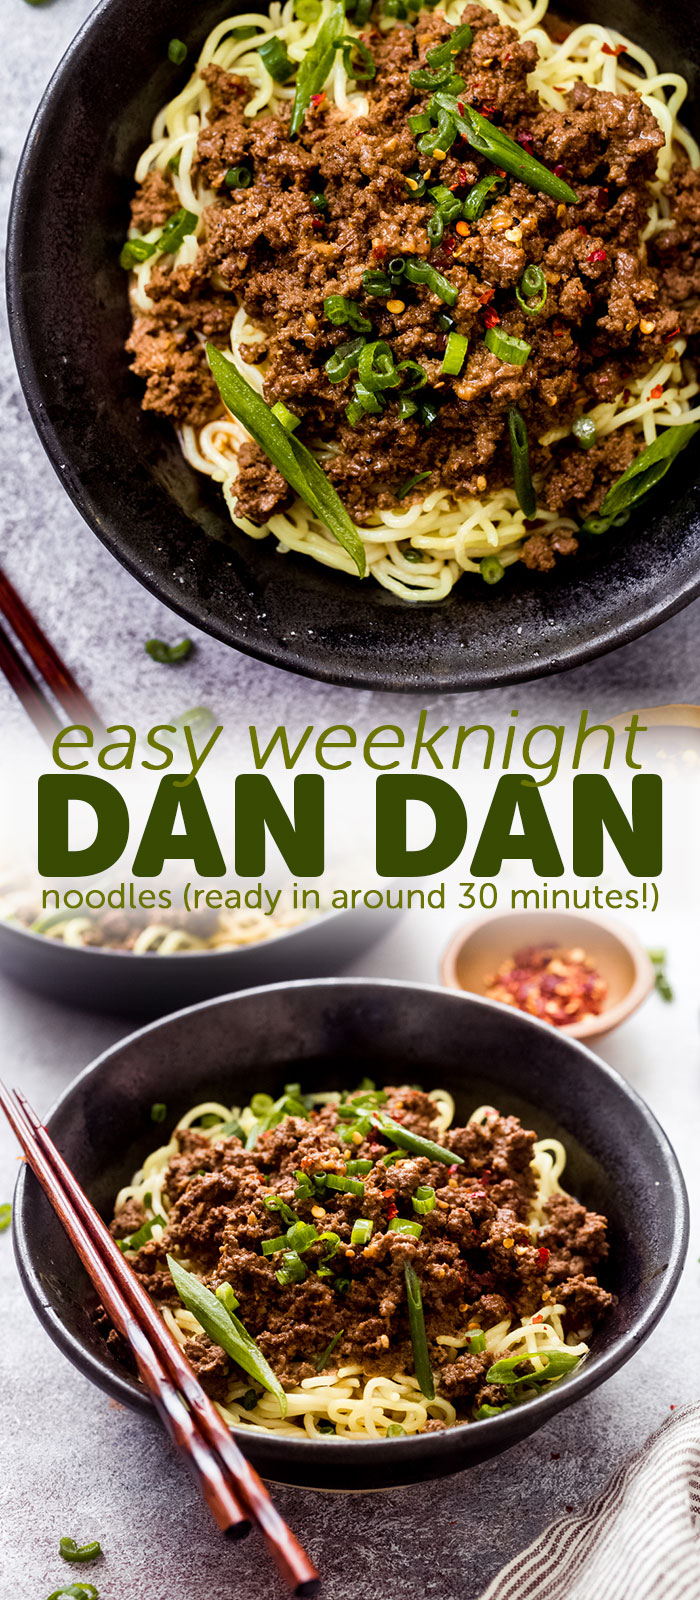 Weeknight Dan Dan Noodles (Just like Take-out!) These noodles can be made with ground chicken, ground beef, ground turkey, or even pork! Ready in about 30 minutes #pastarecipes #asiantakeout #takeoutfakeout #dandannoodles #dandannoodlerecipe | Littlespicejar.com